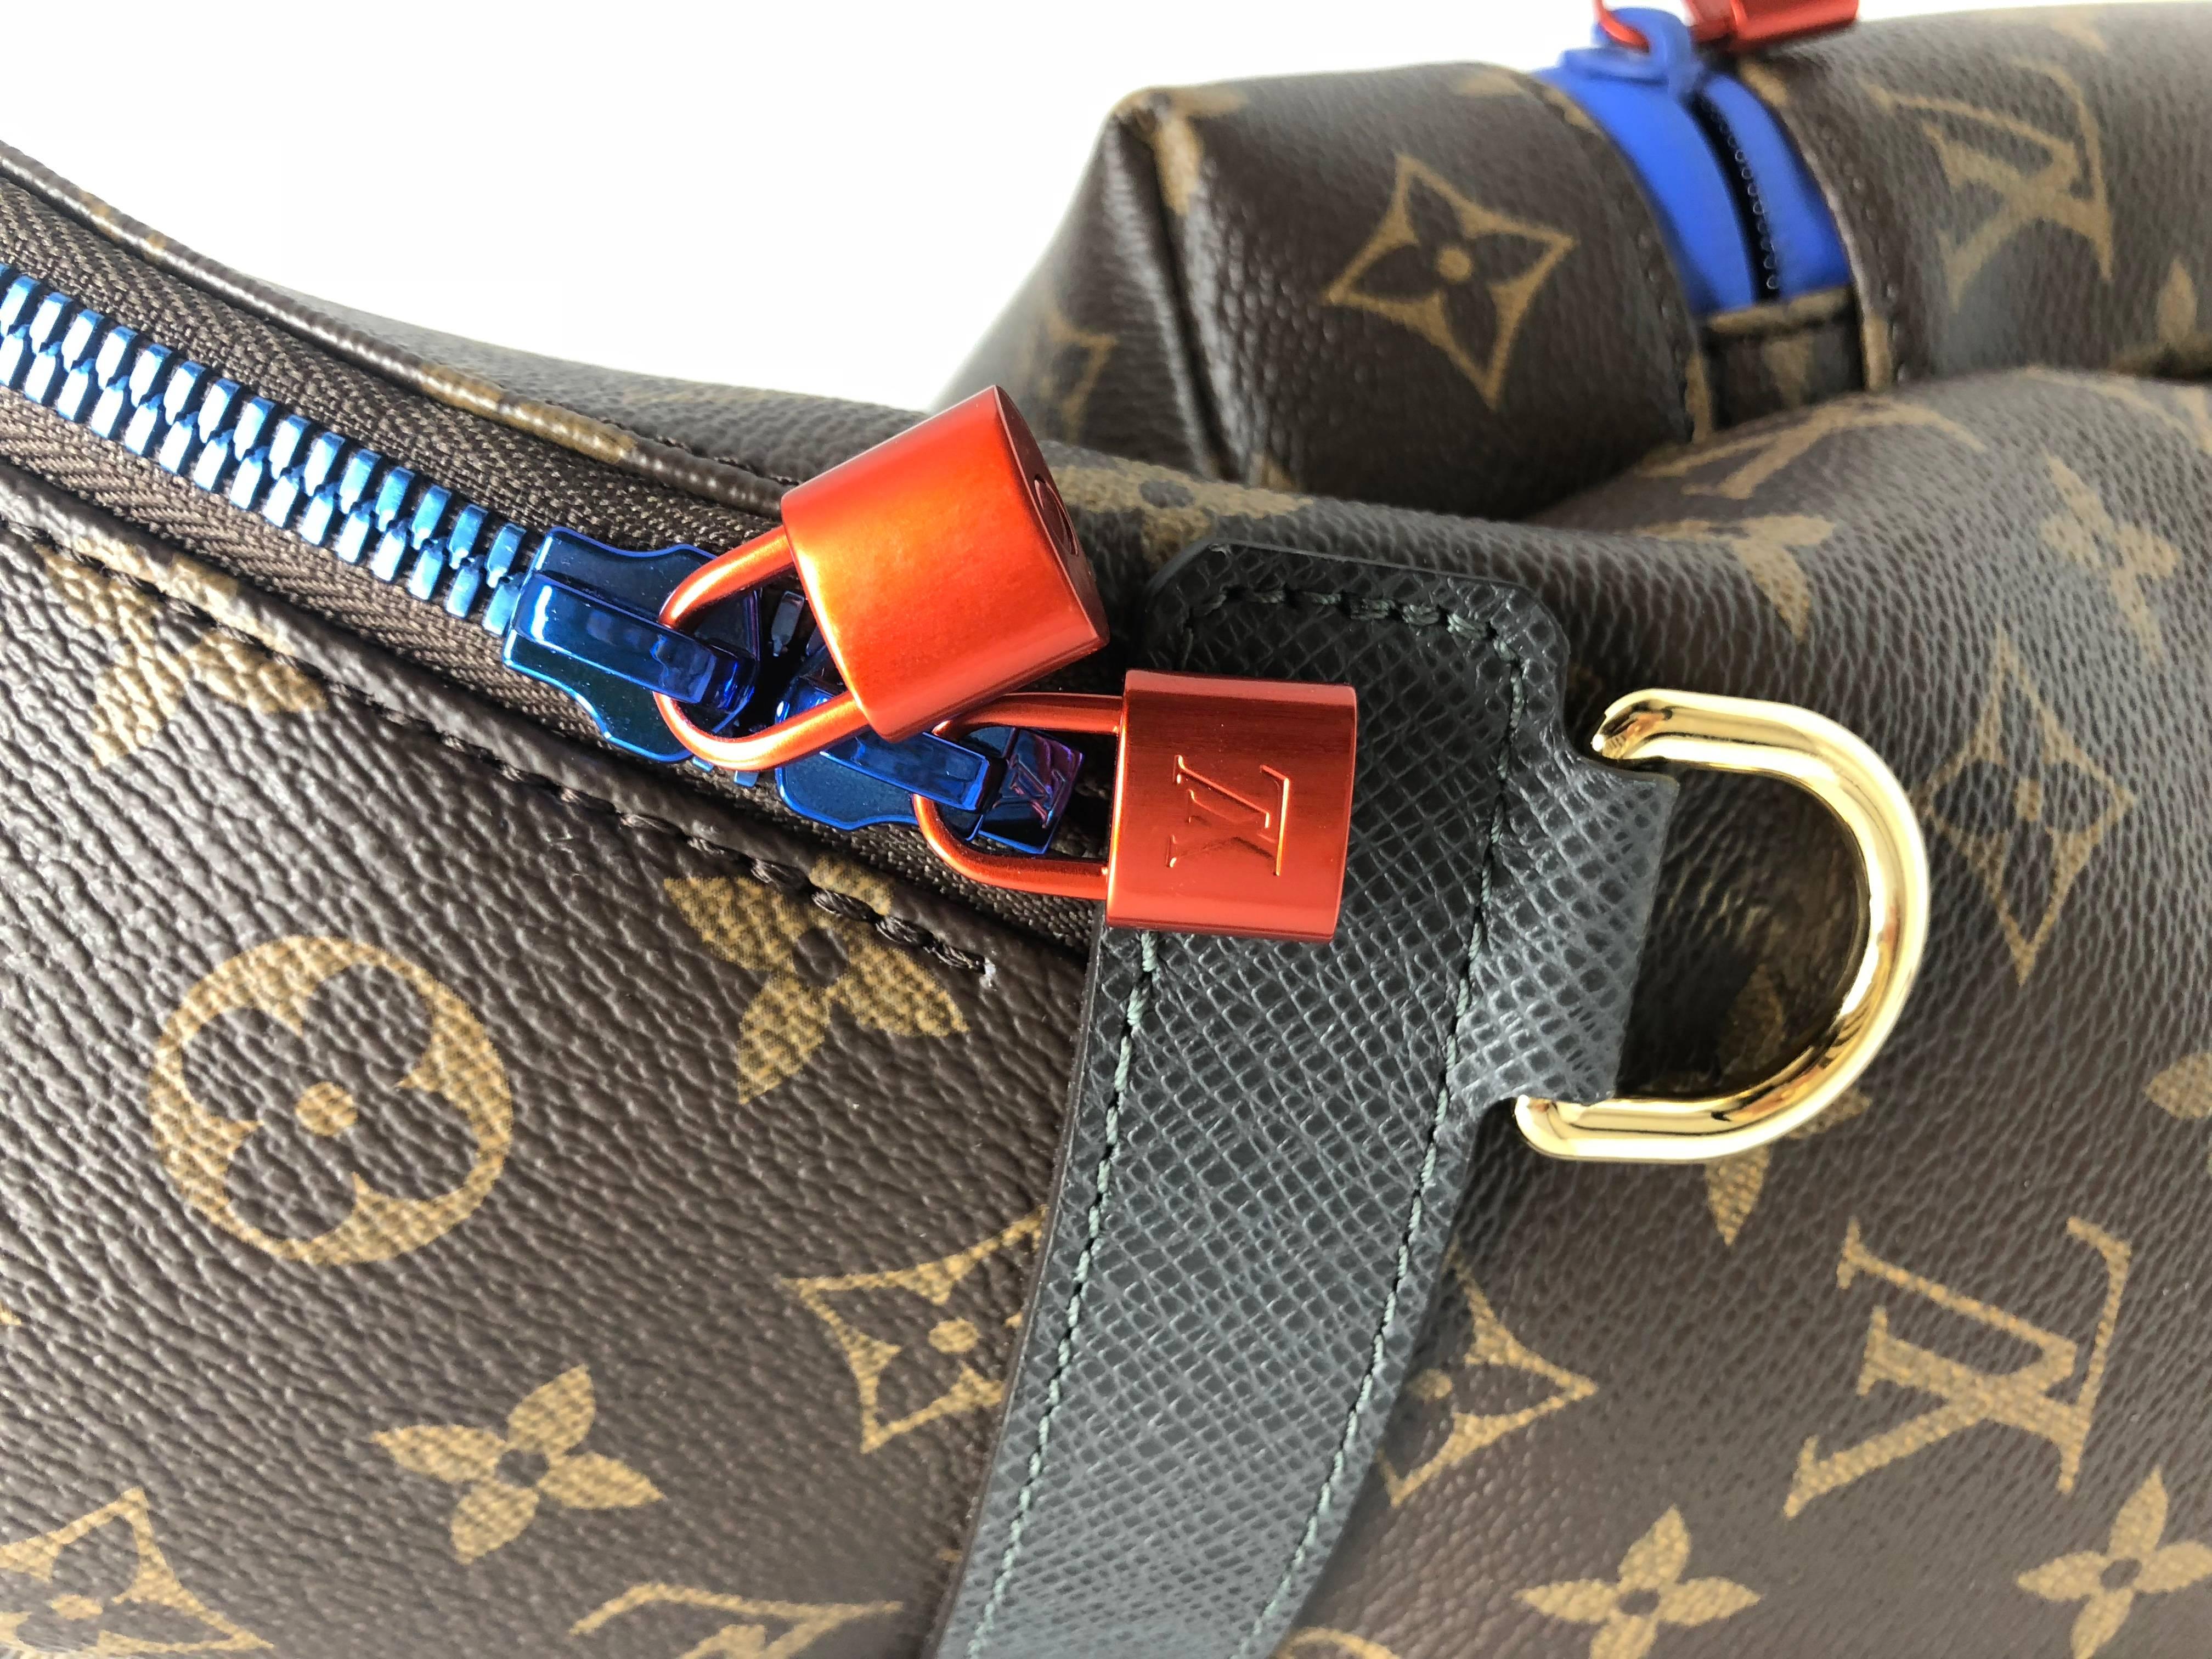 Sold out and last collection designed by Kim Jones for LV. The Apollo backpack is a sports-inspired bag that mixes the monogram canvas with scuba zips and colorful hardware. Brand new with dust cover. 2018 collection. 